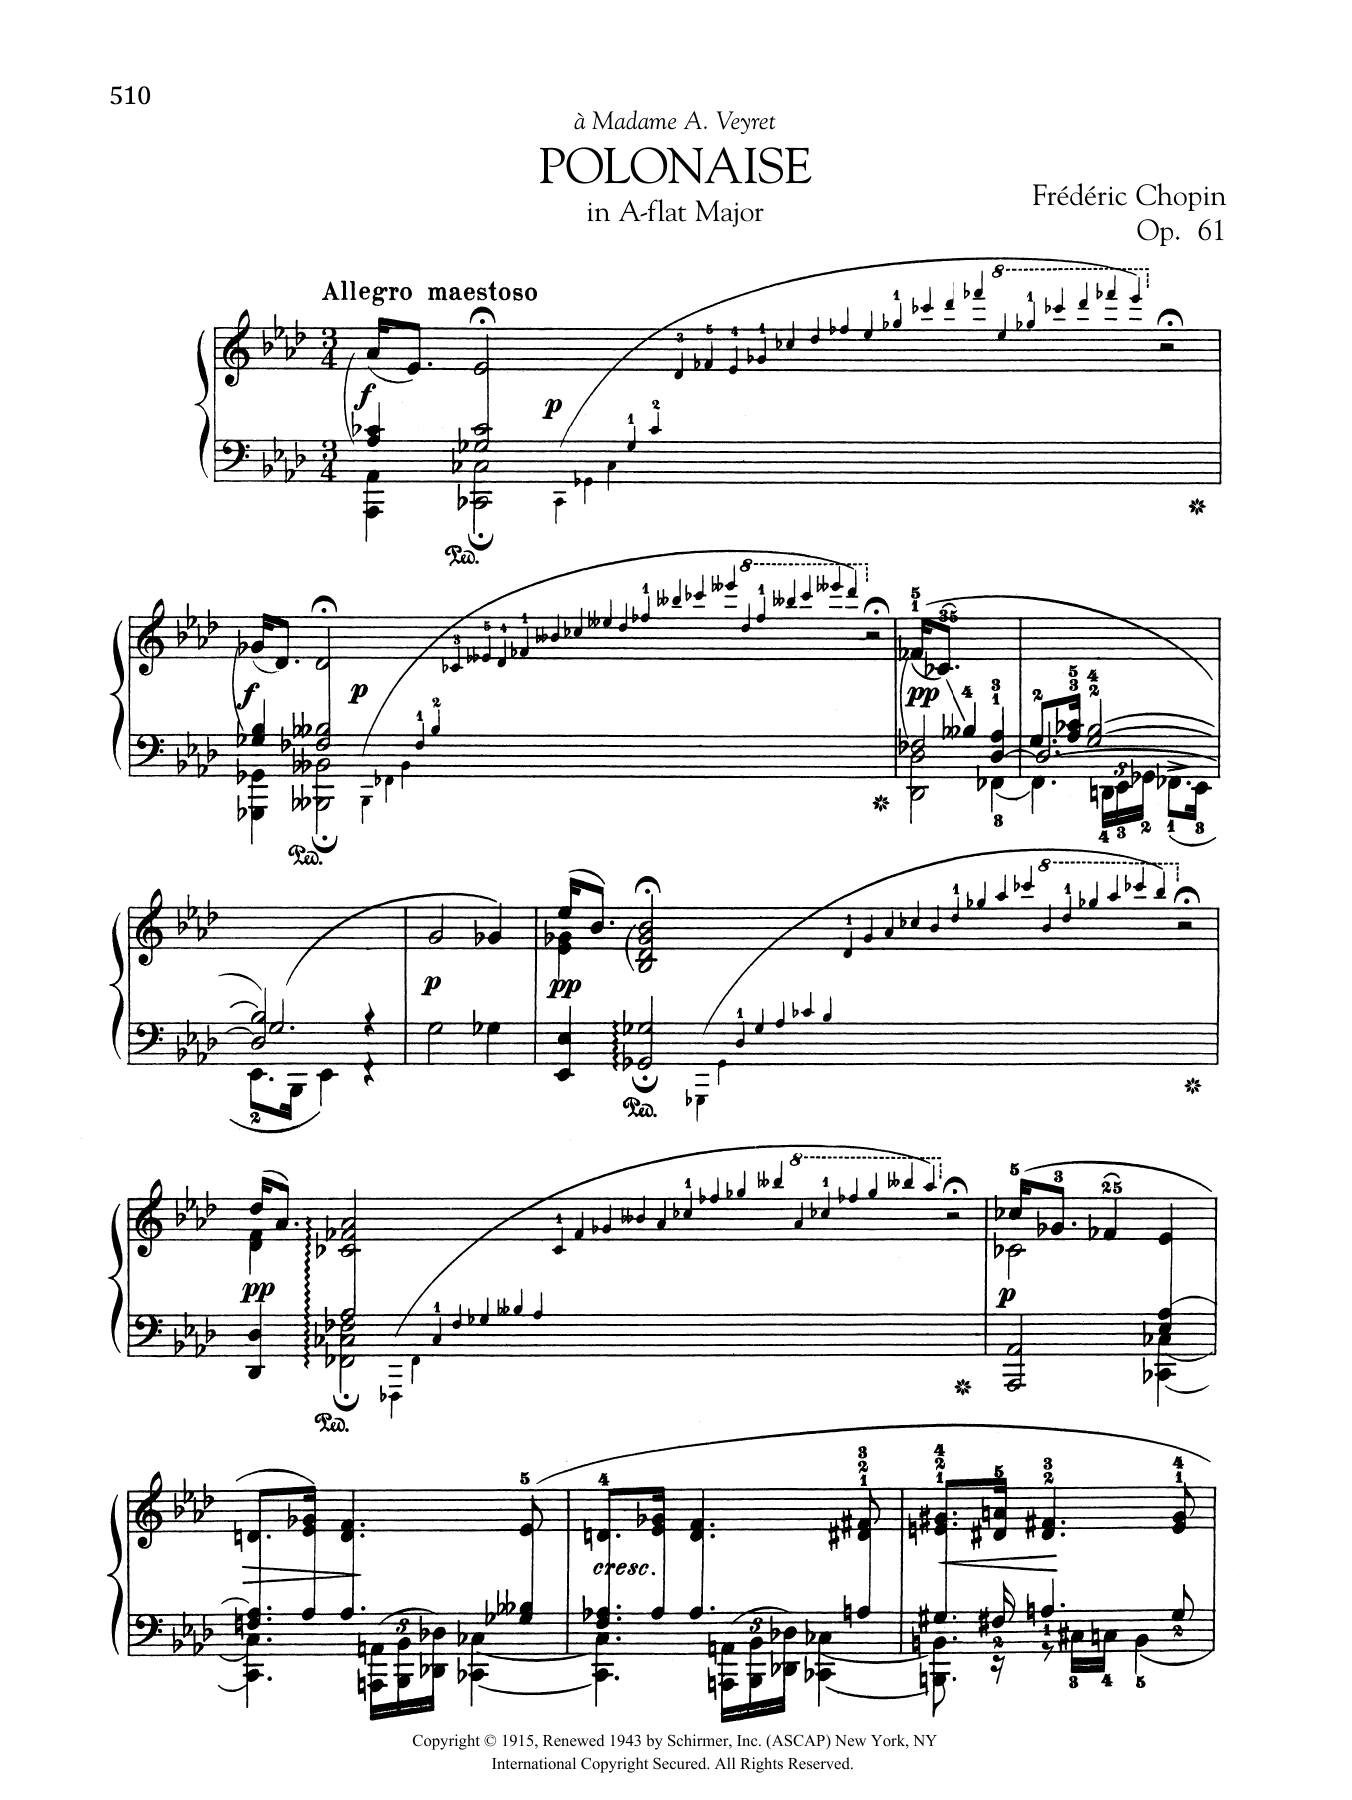 Download Frederic Chopin Polonaise in A-flat Major, Op. 61 Sheet Music